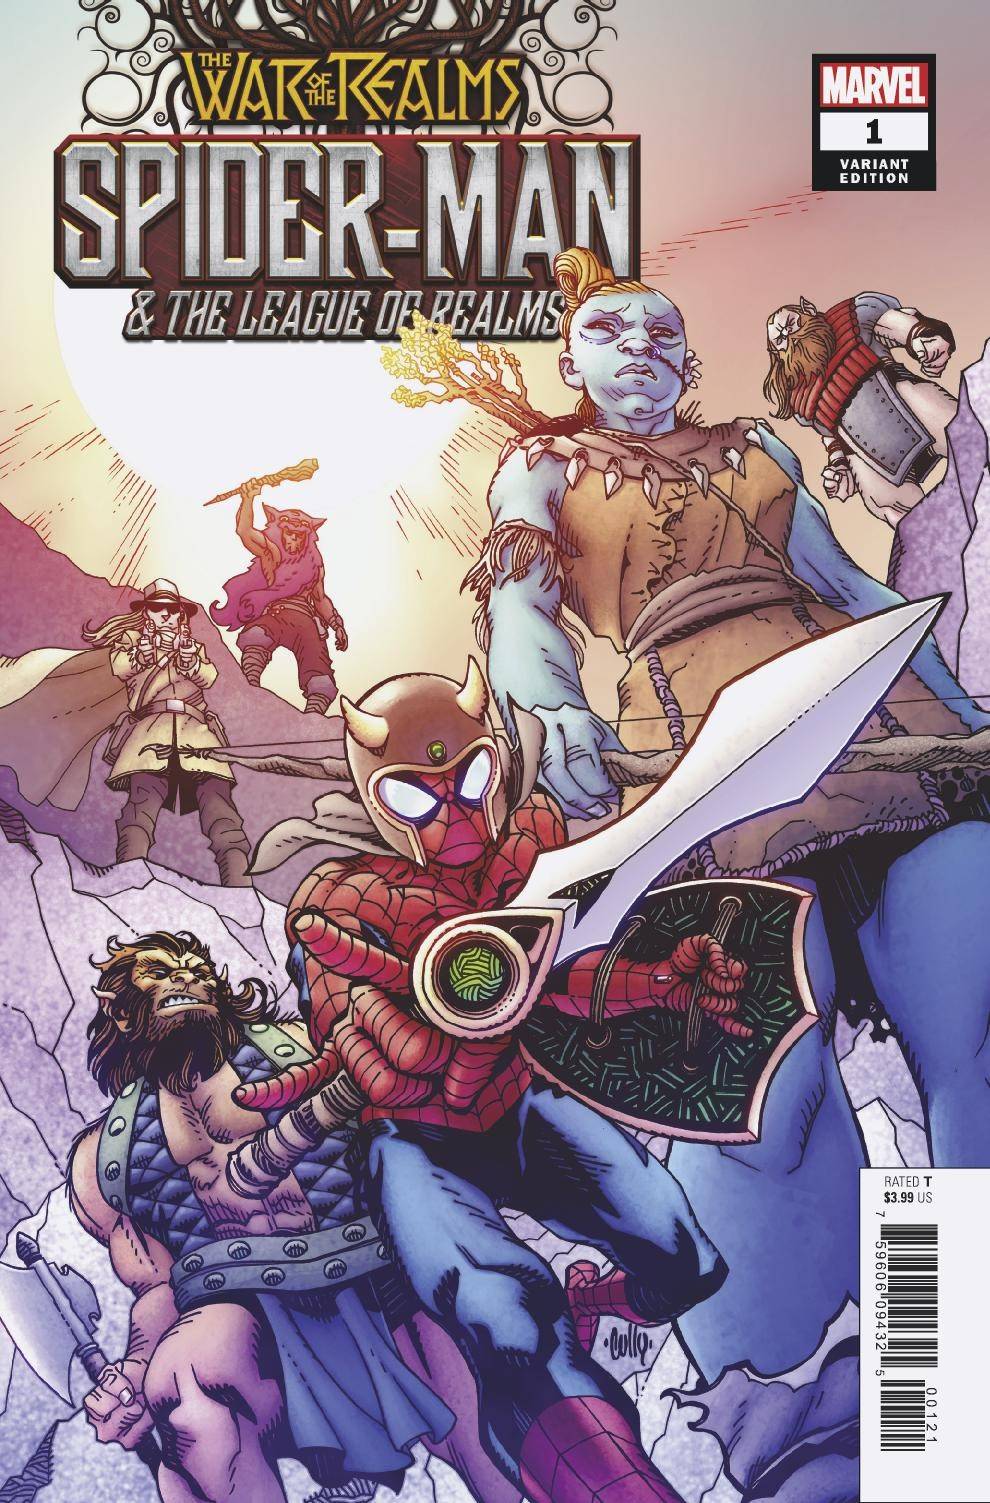 WAR OF REALMS SPIDER-MAN & LEAGUE OF REALMS #1 (OF 3) HAMNER 05/08/19 FOC 04/22/19